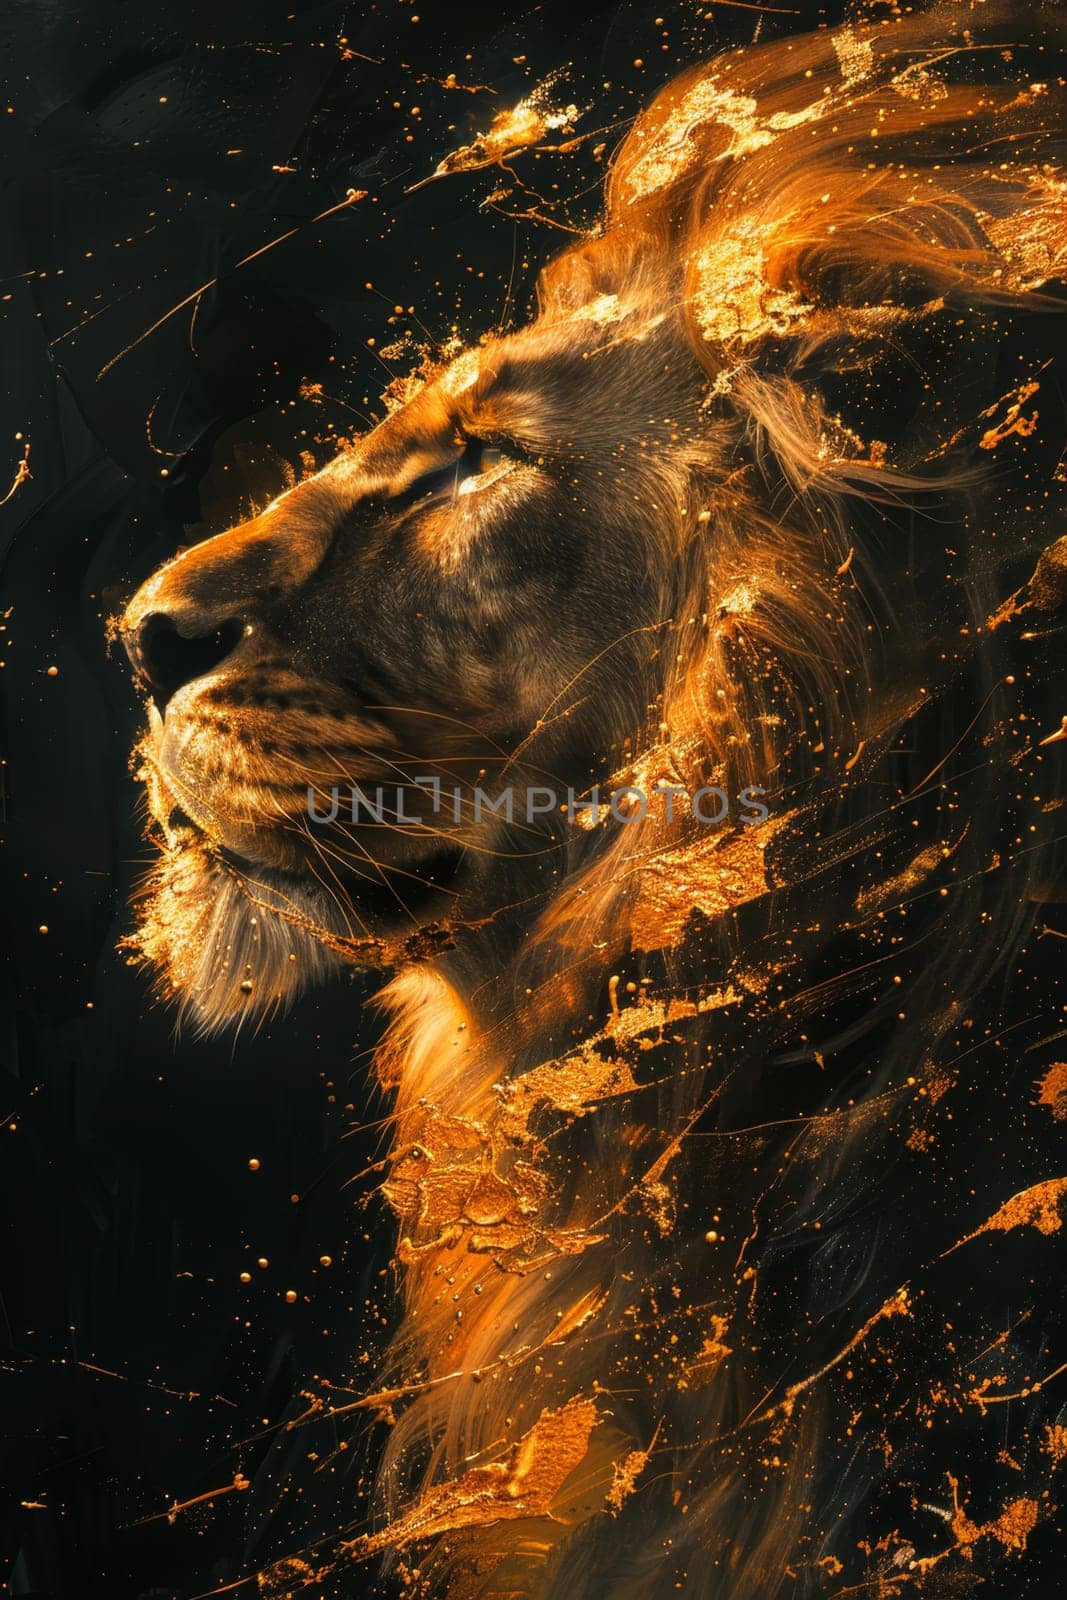 portrait of a lion's head on a black background. The illustration by Lobachad